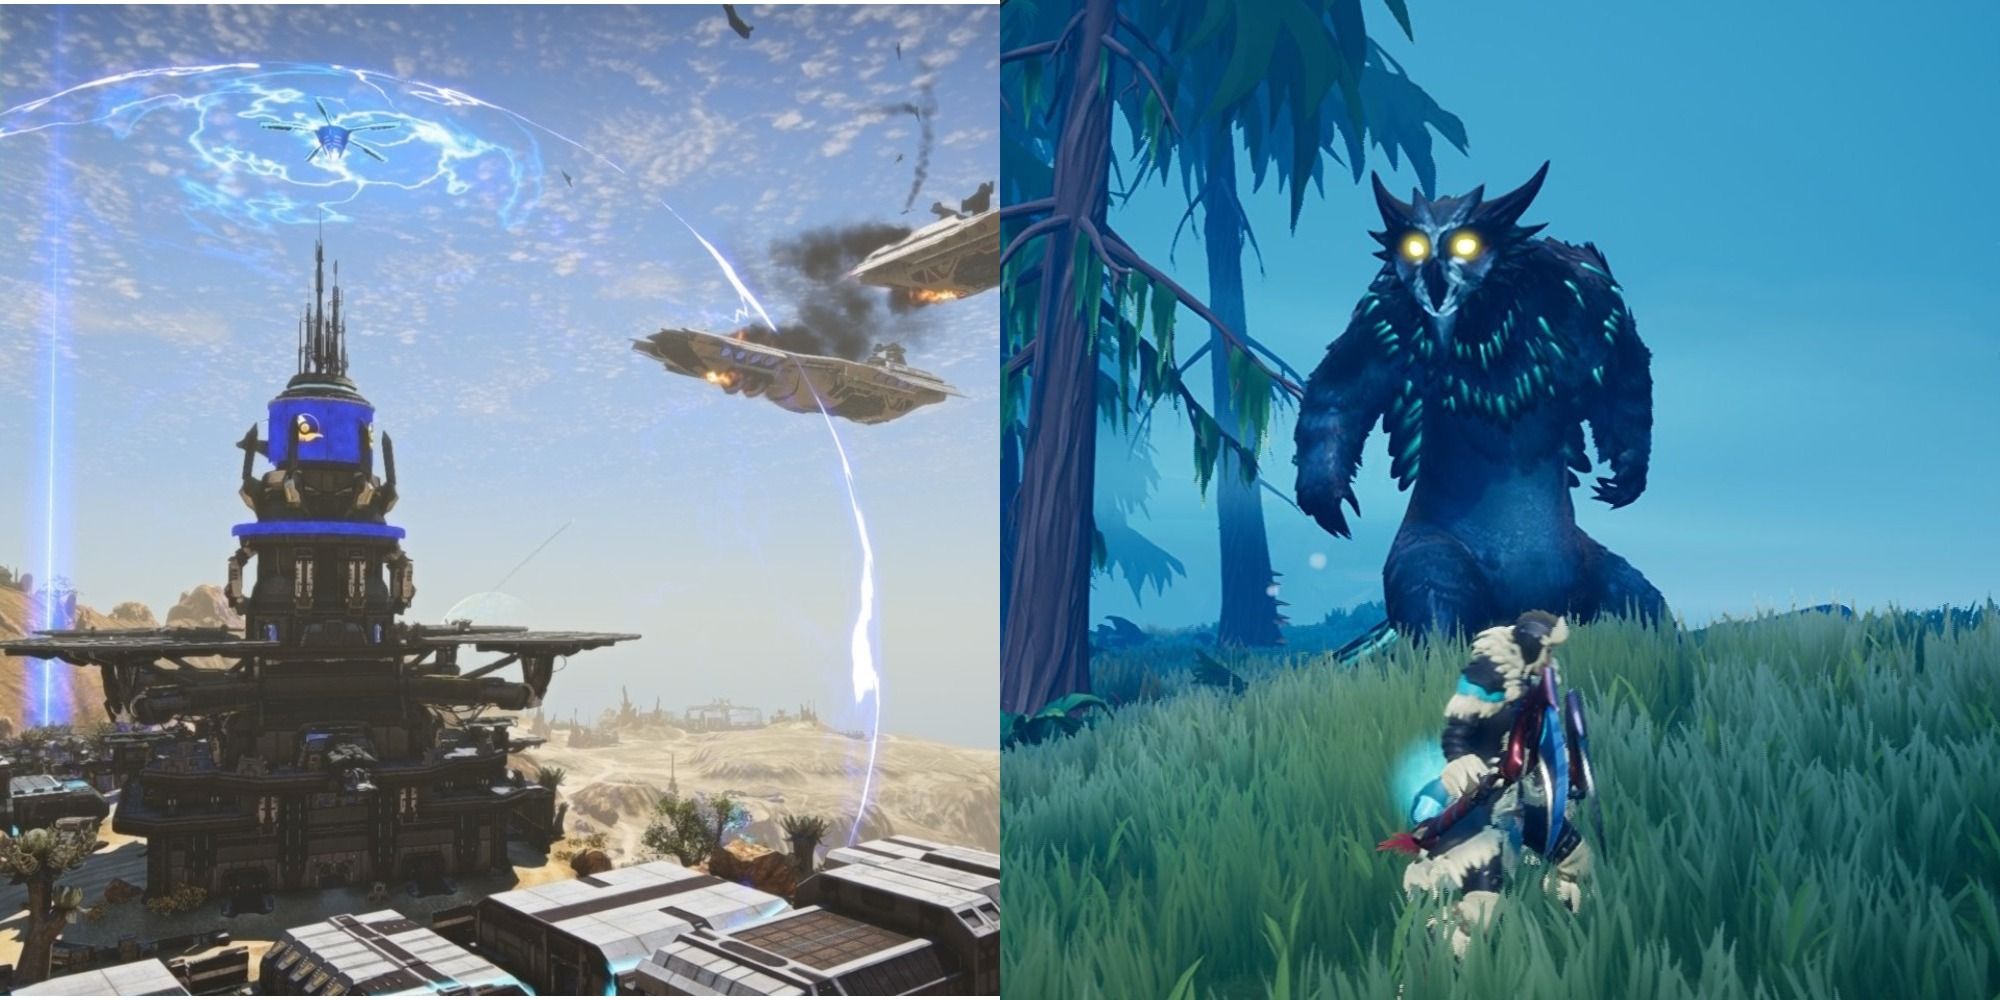 Gameplay from Planetside 2 and Dauntless